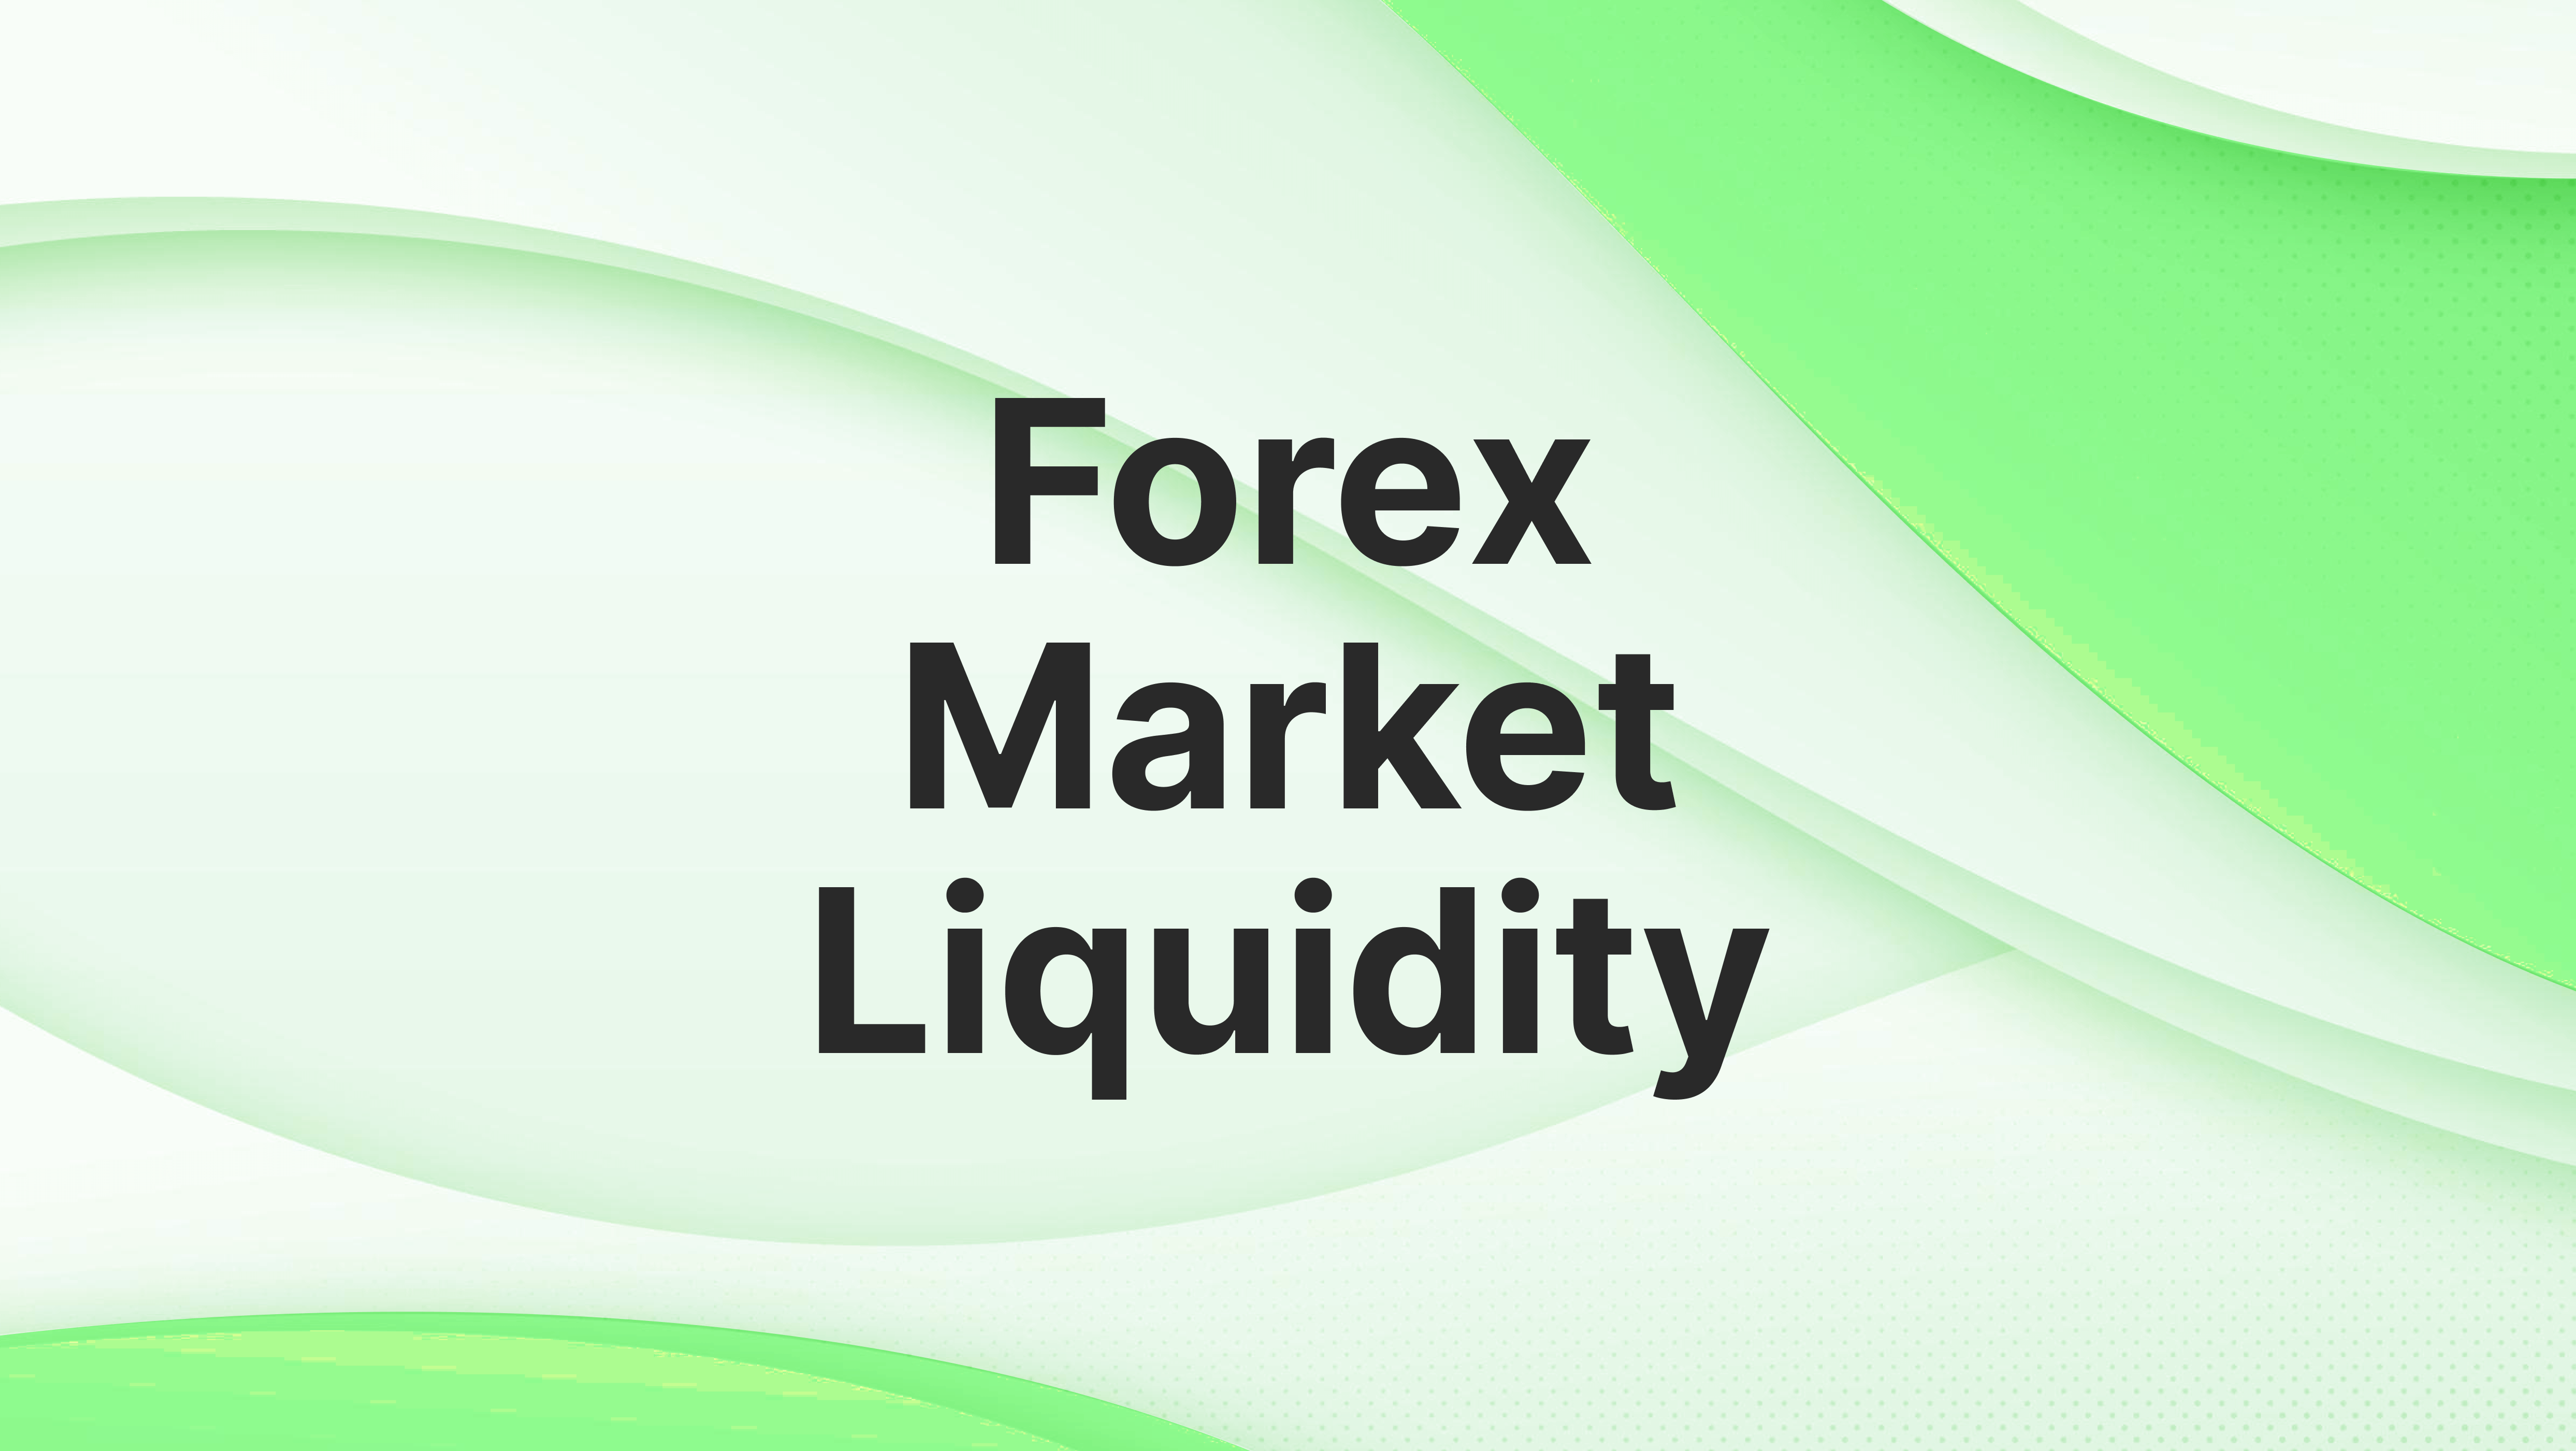  Why is Forex Market Liquidity so Important for Businesses?